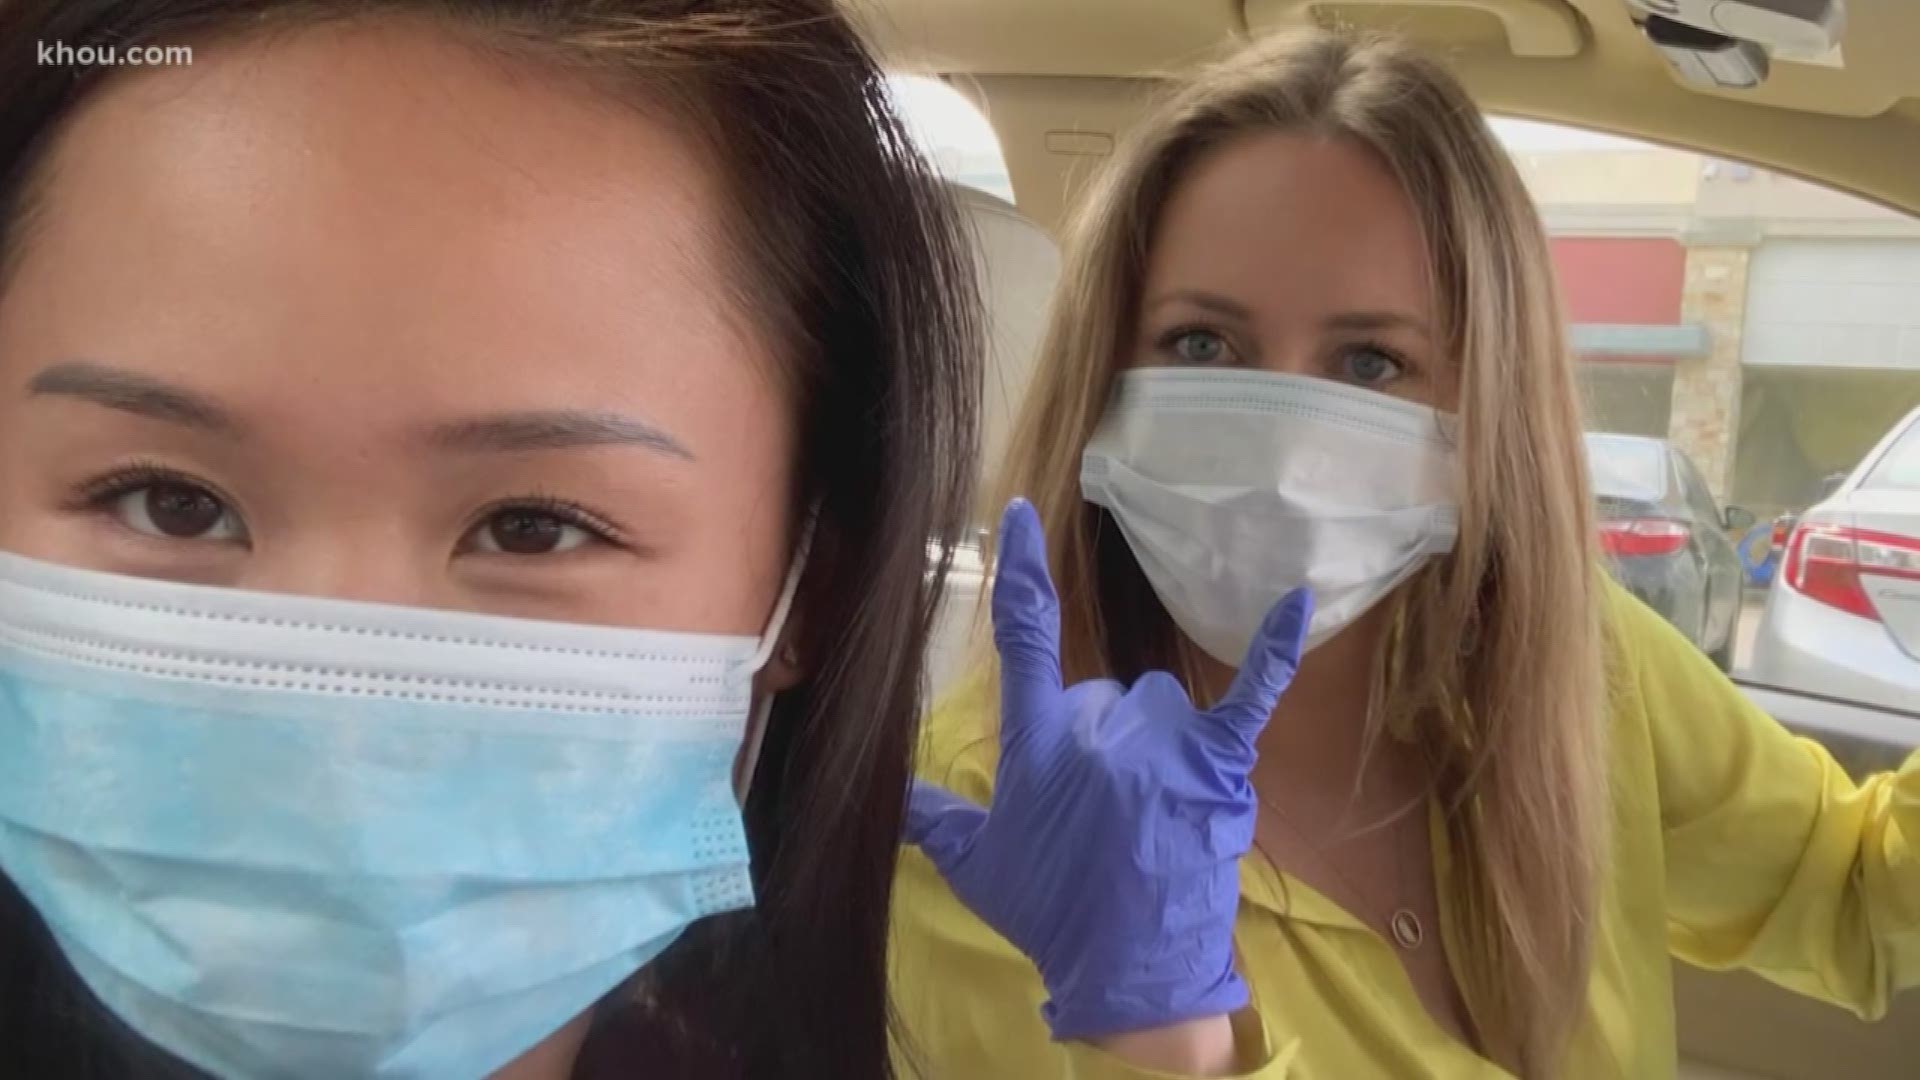 A group of women committed to making a difference has started a movement to get medical supplies to Houston health workers. So far they donated thousands of masks.